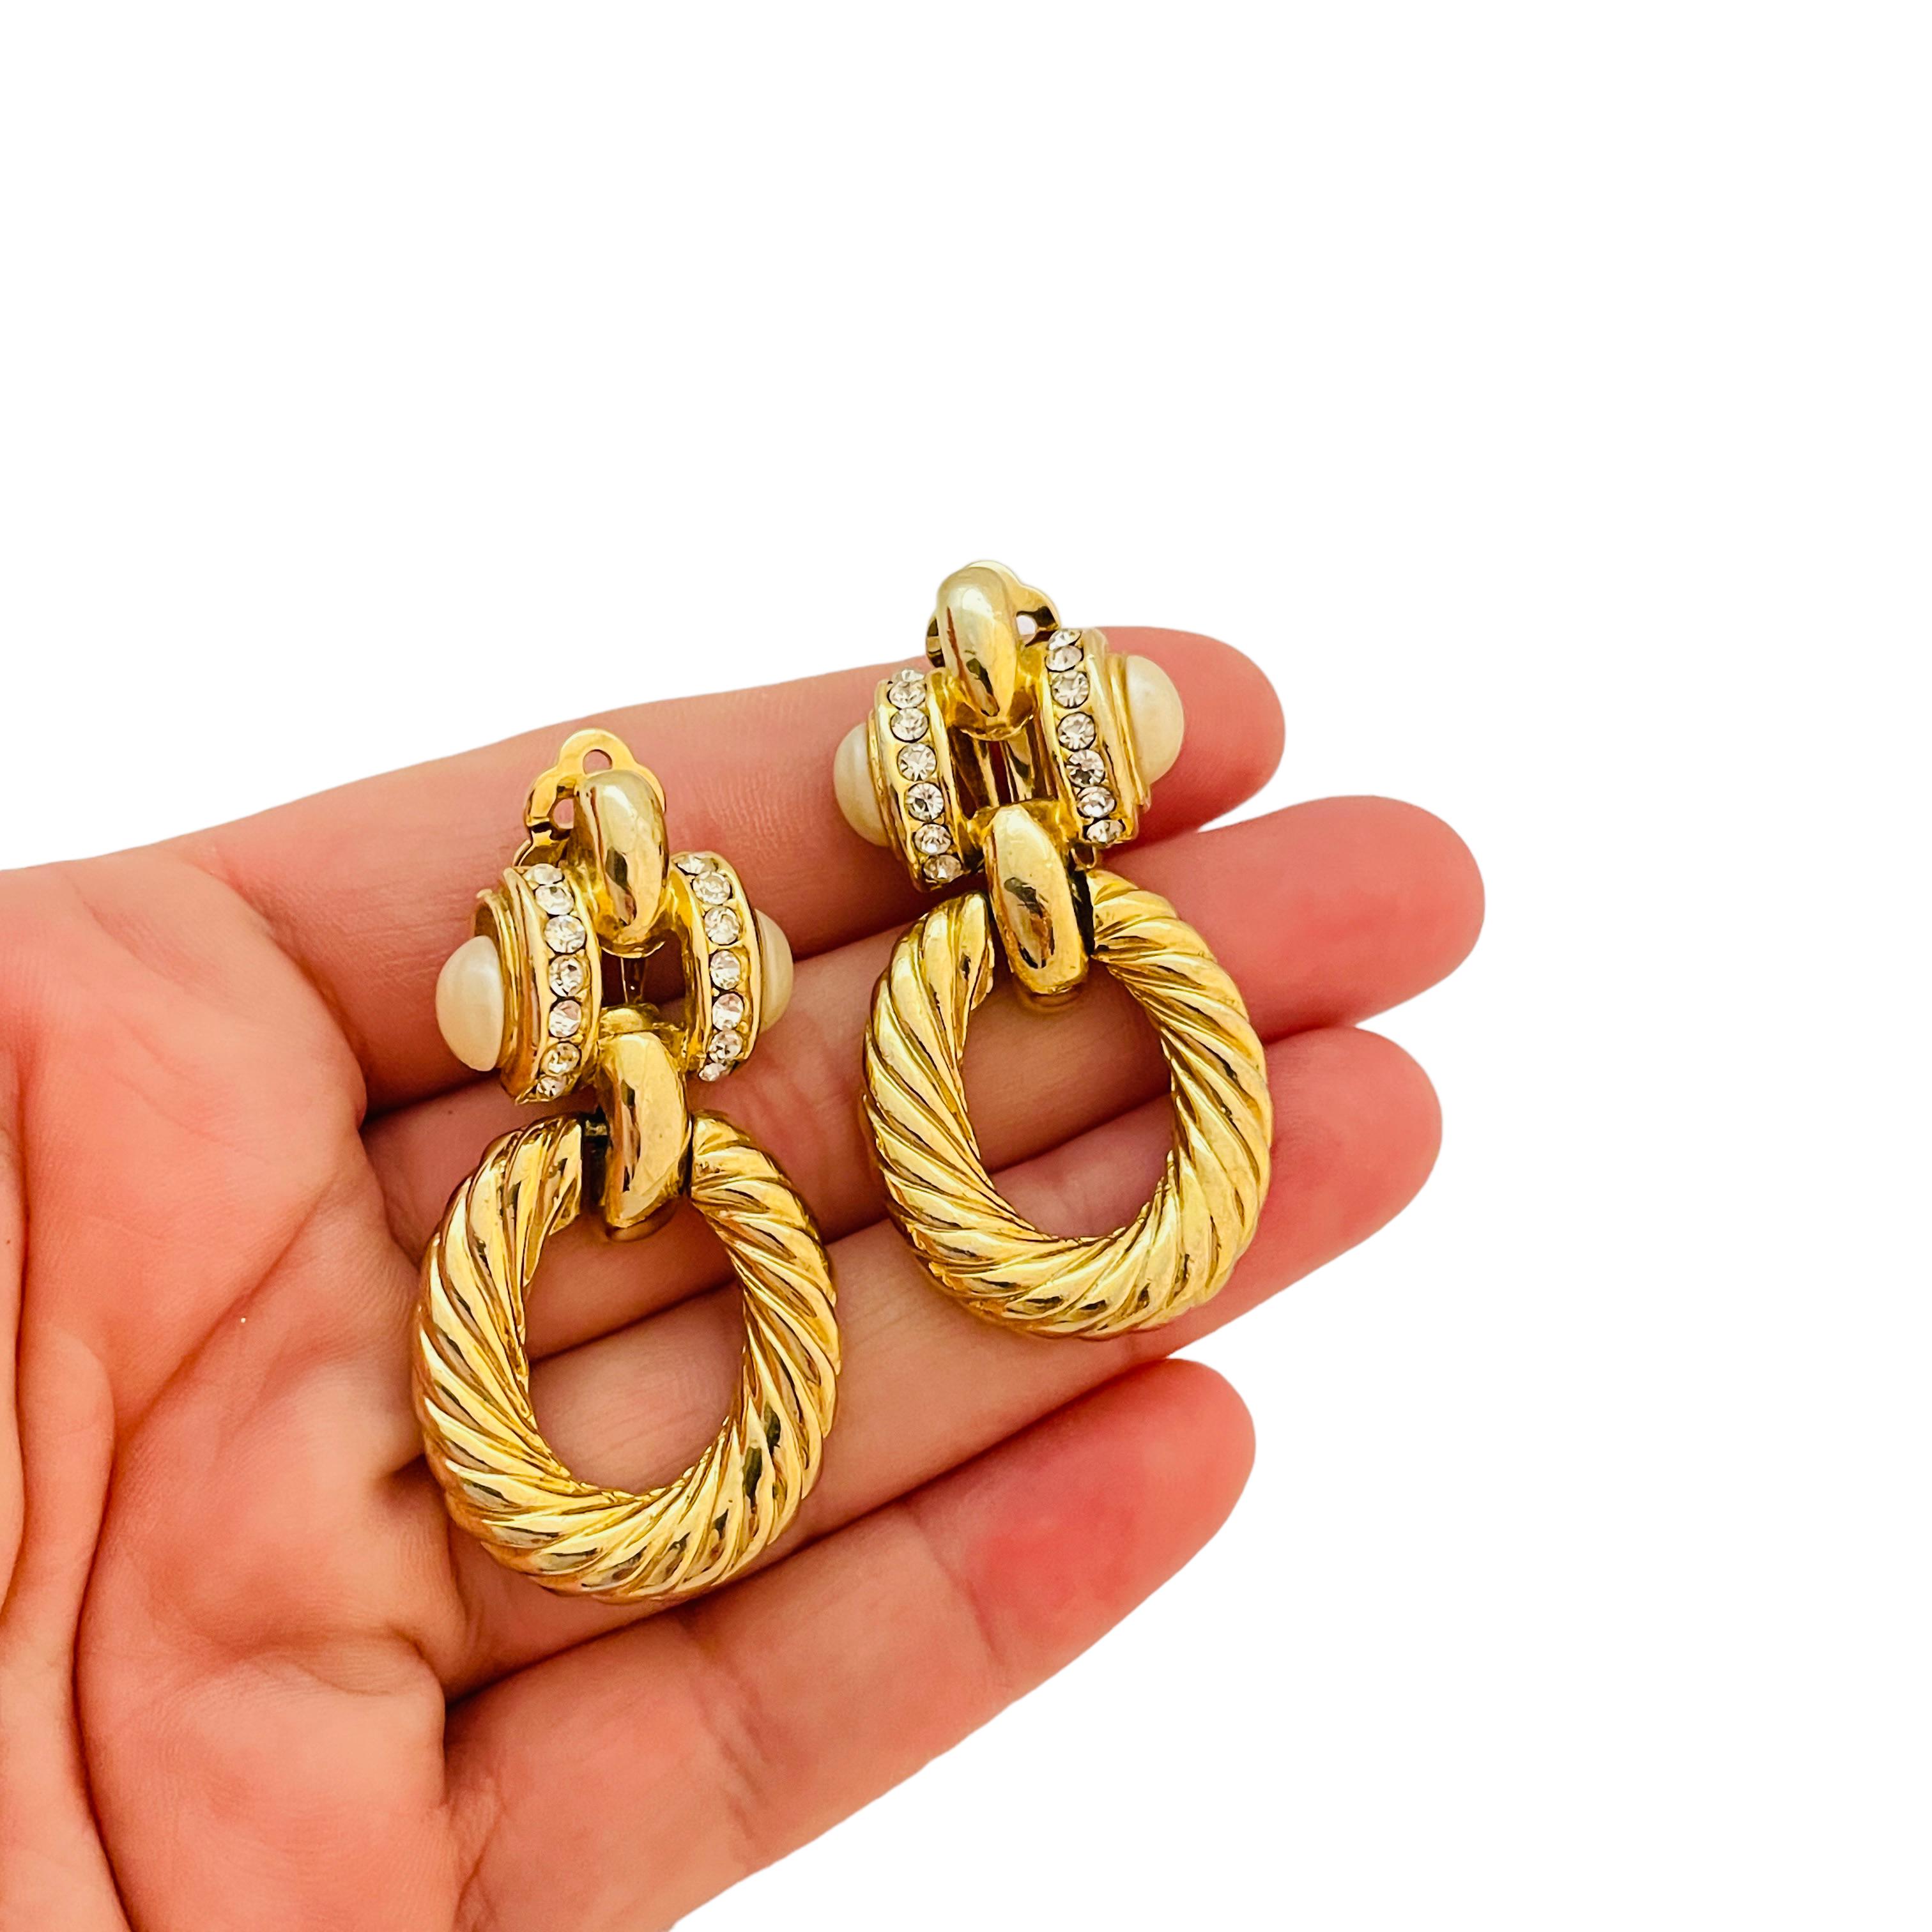 givenchy earrings vintage